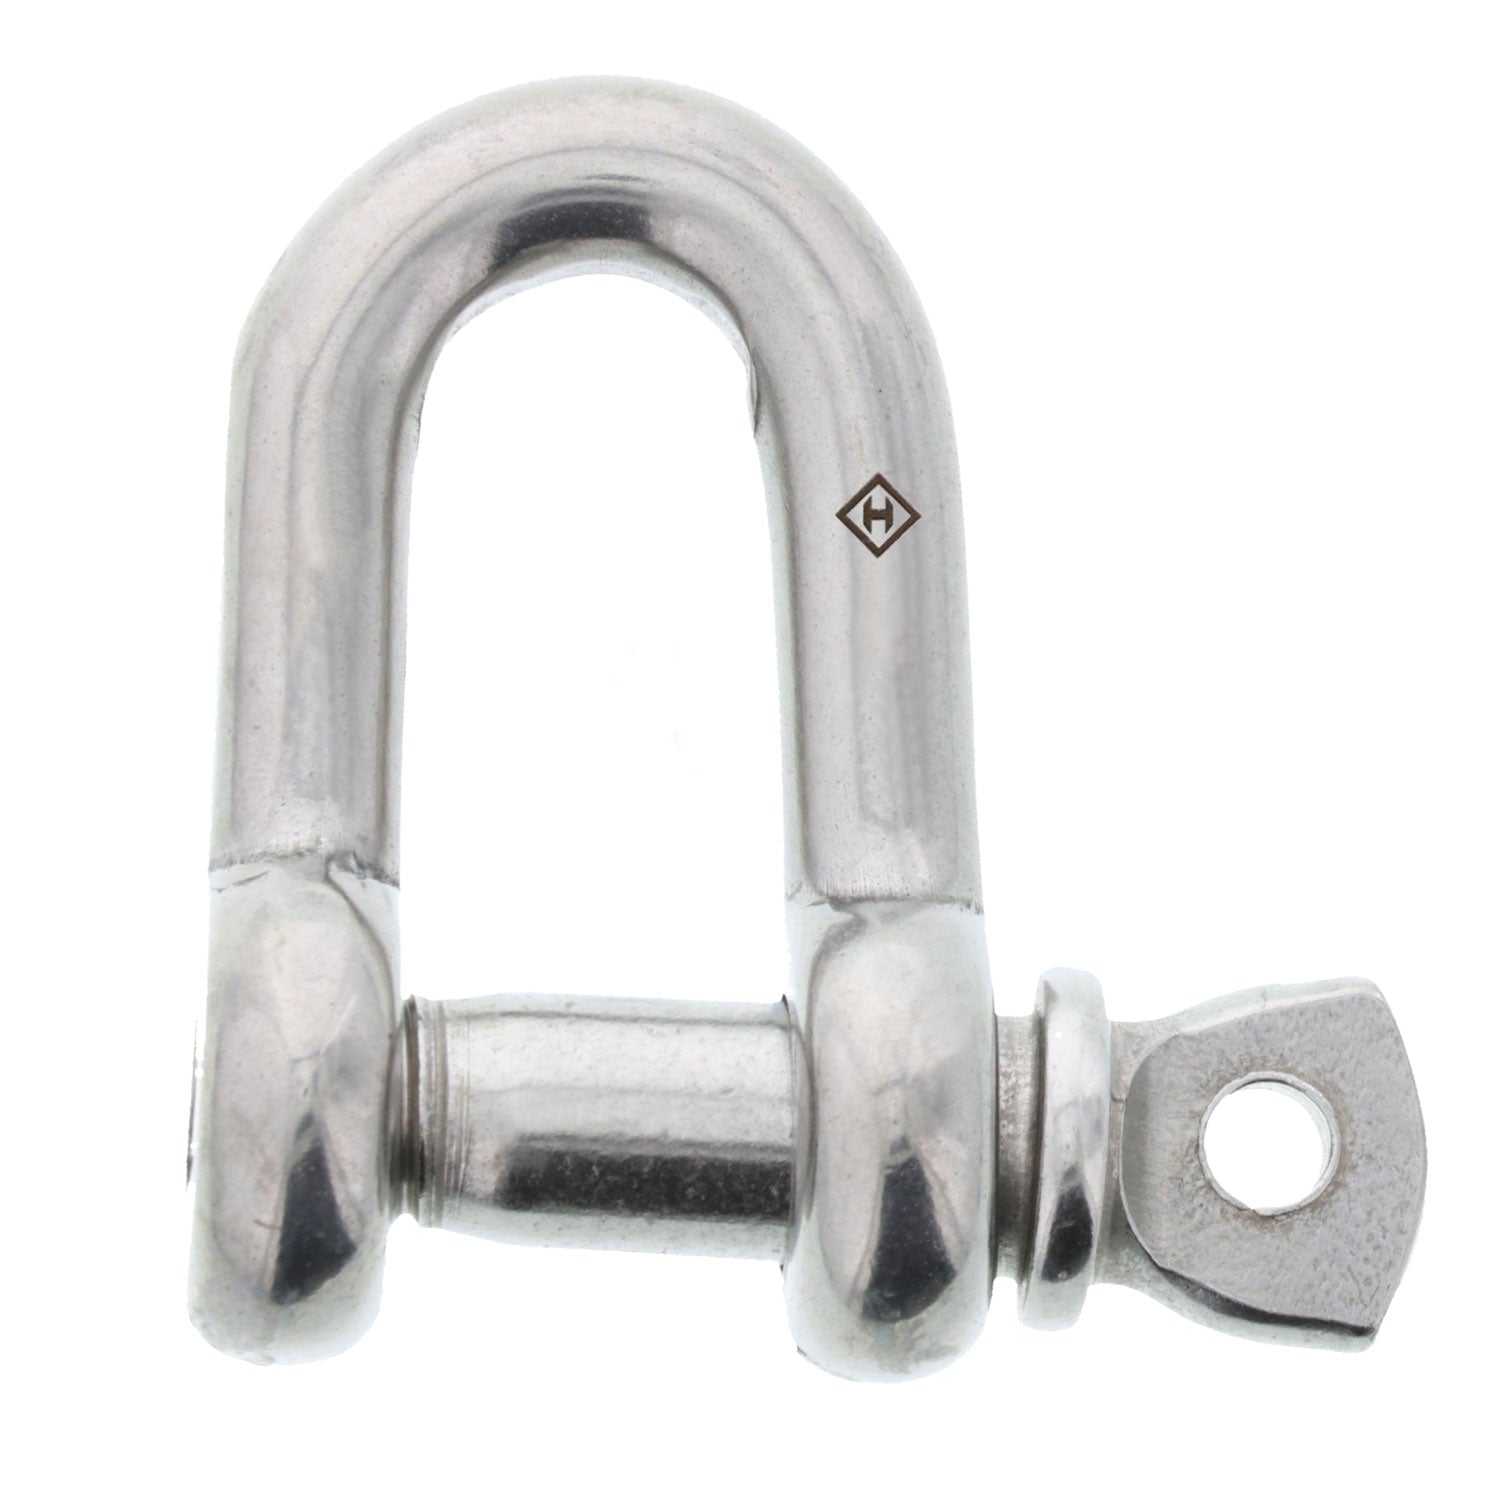 NEW SEACHOICE TWISTED SHACKLE-SS-3/8IN SCP 44681 